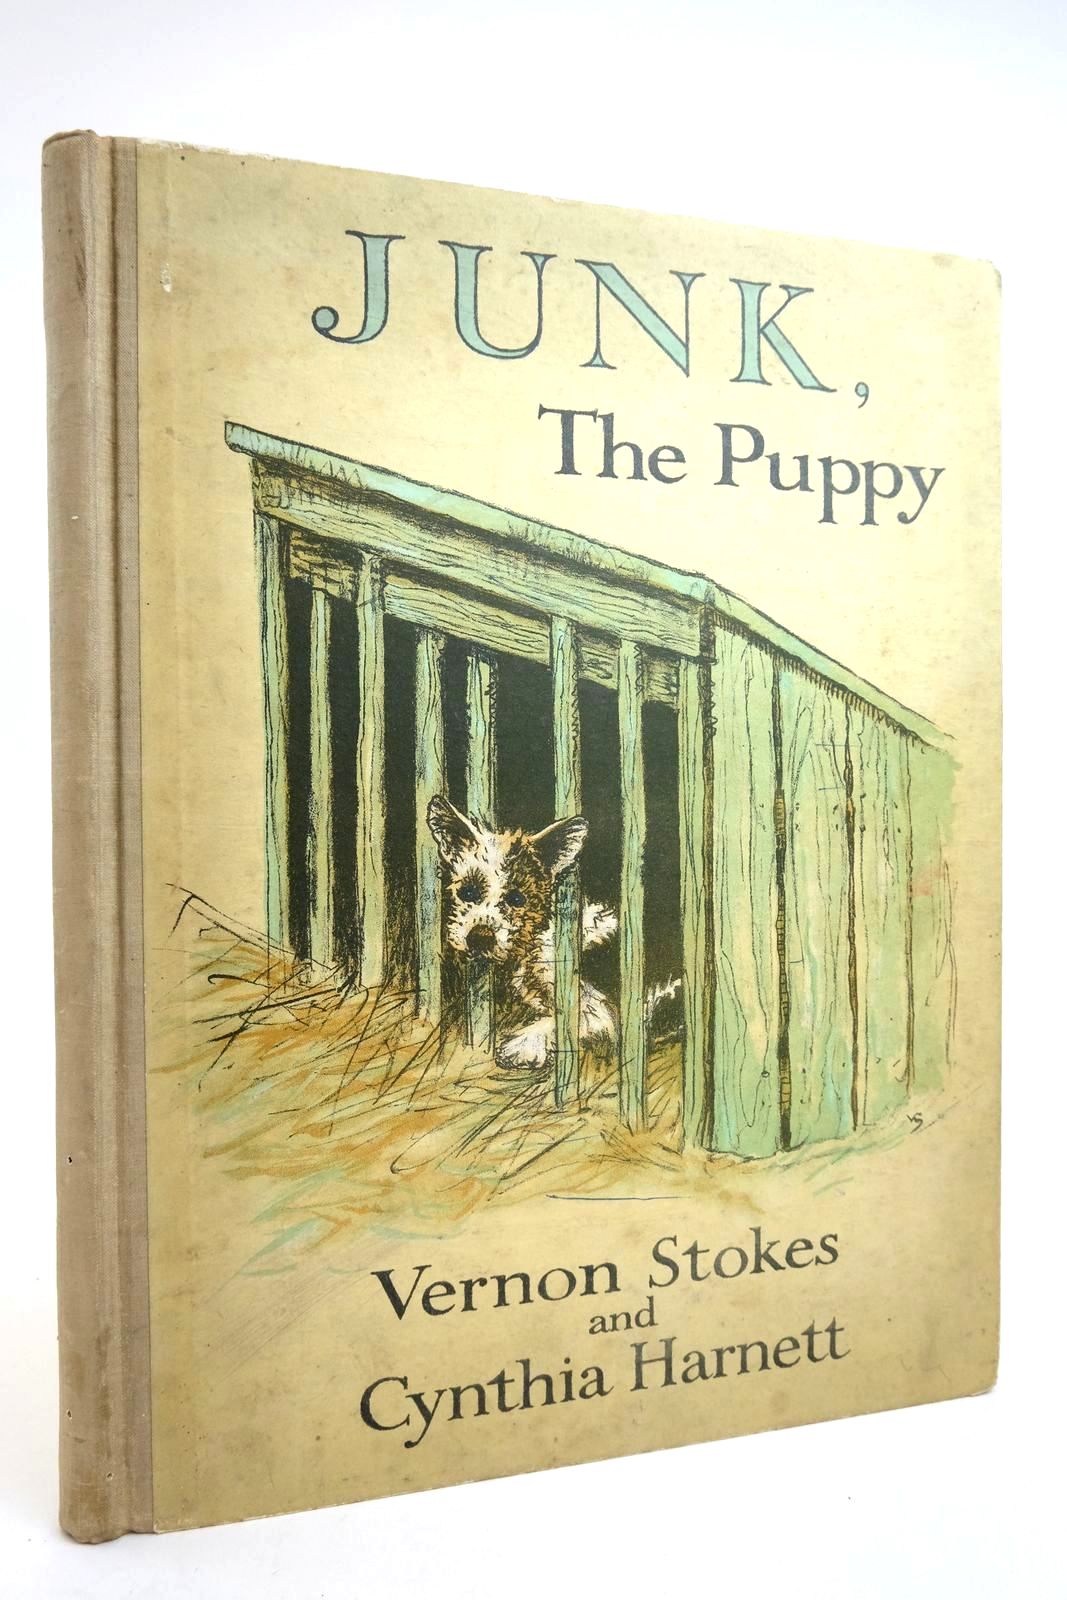 Photo of JUNK, THE PUPPY written by Stokes, Vernon
Harnett, Cynthia illustrated by Stokes, Vernon
Harnett, Cynthia published by Blackie & Son Ltd. (STOCK CODE: 2135896)  for sale by Stella & Rose's Books